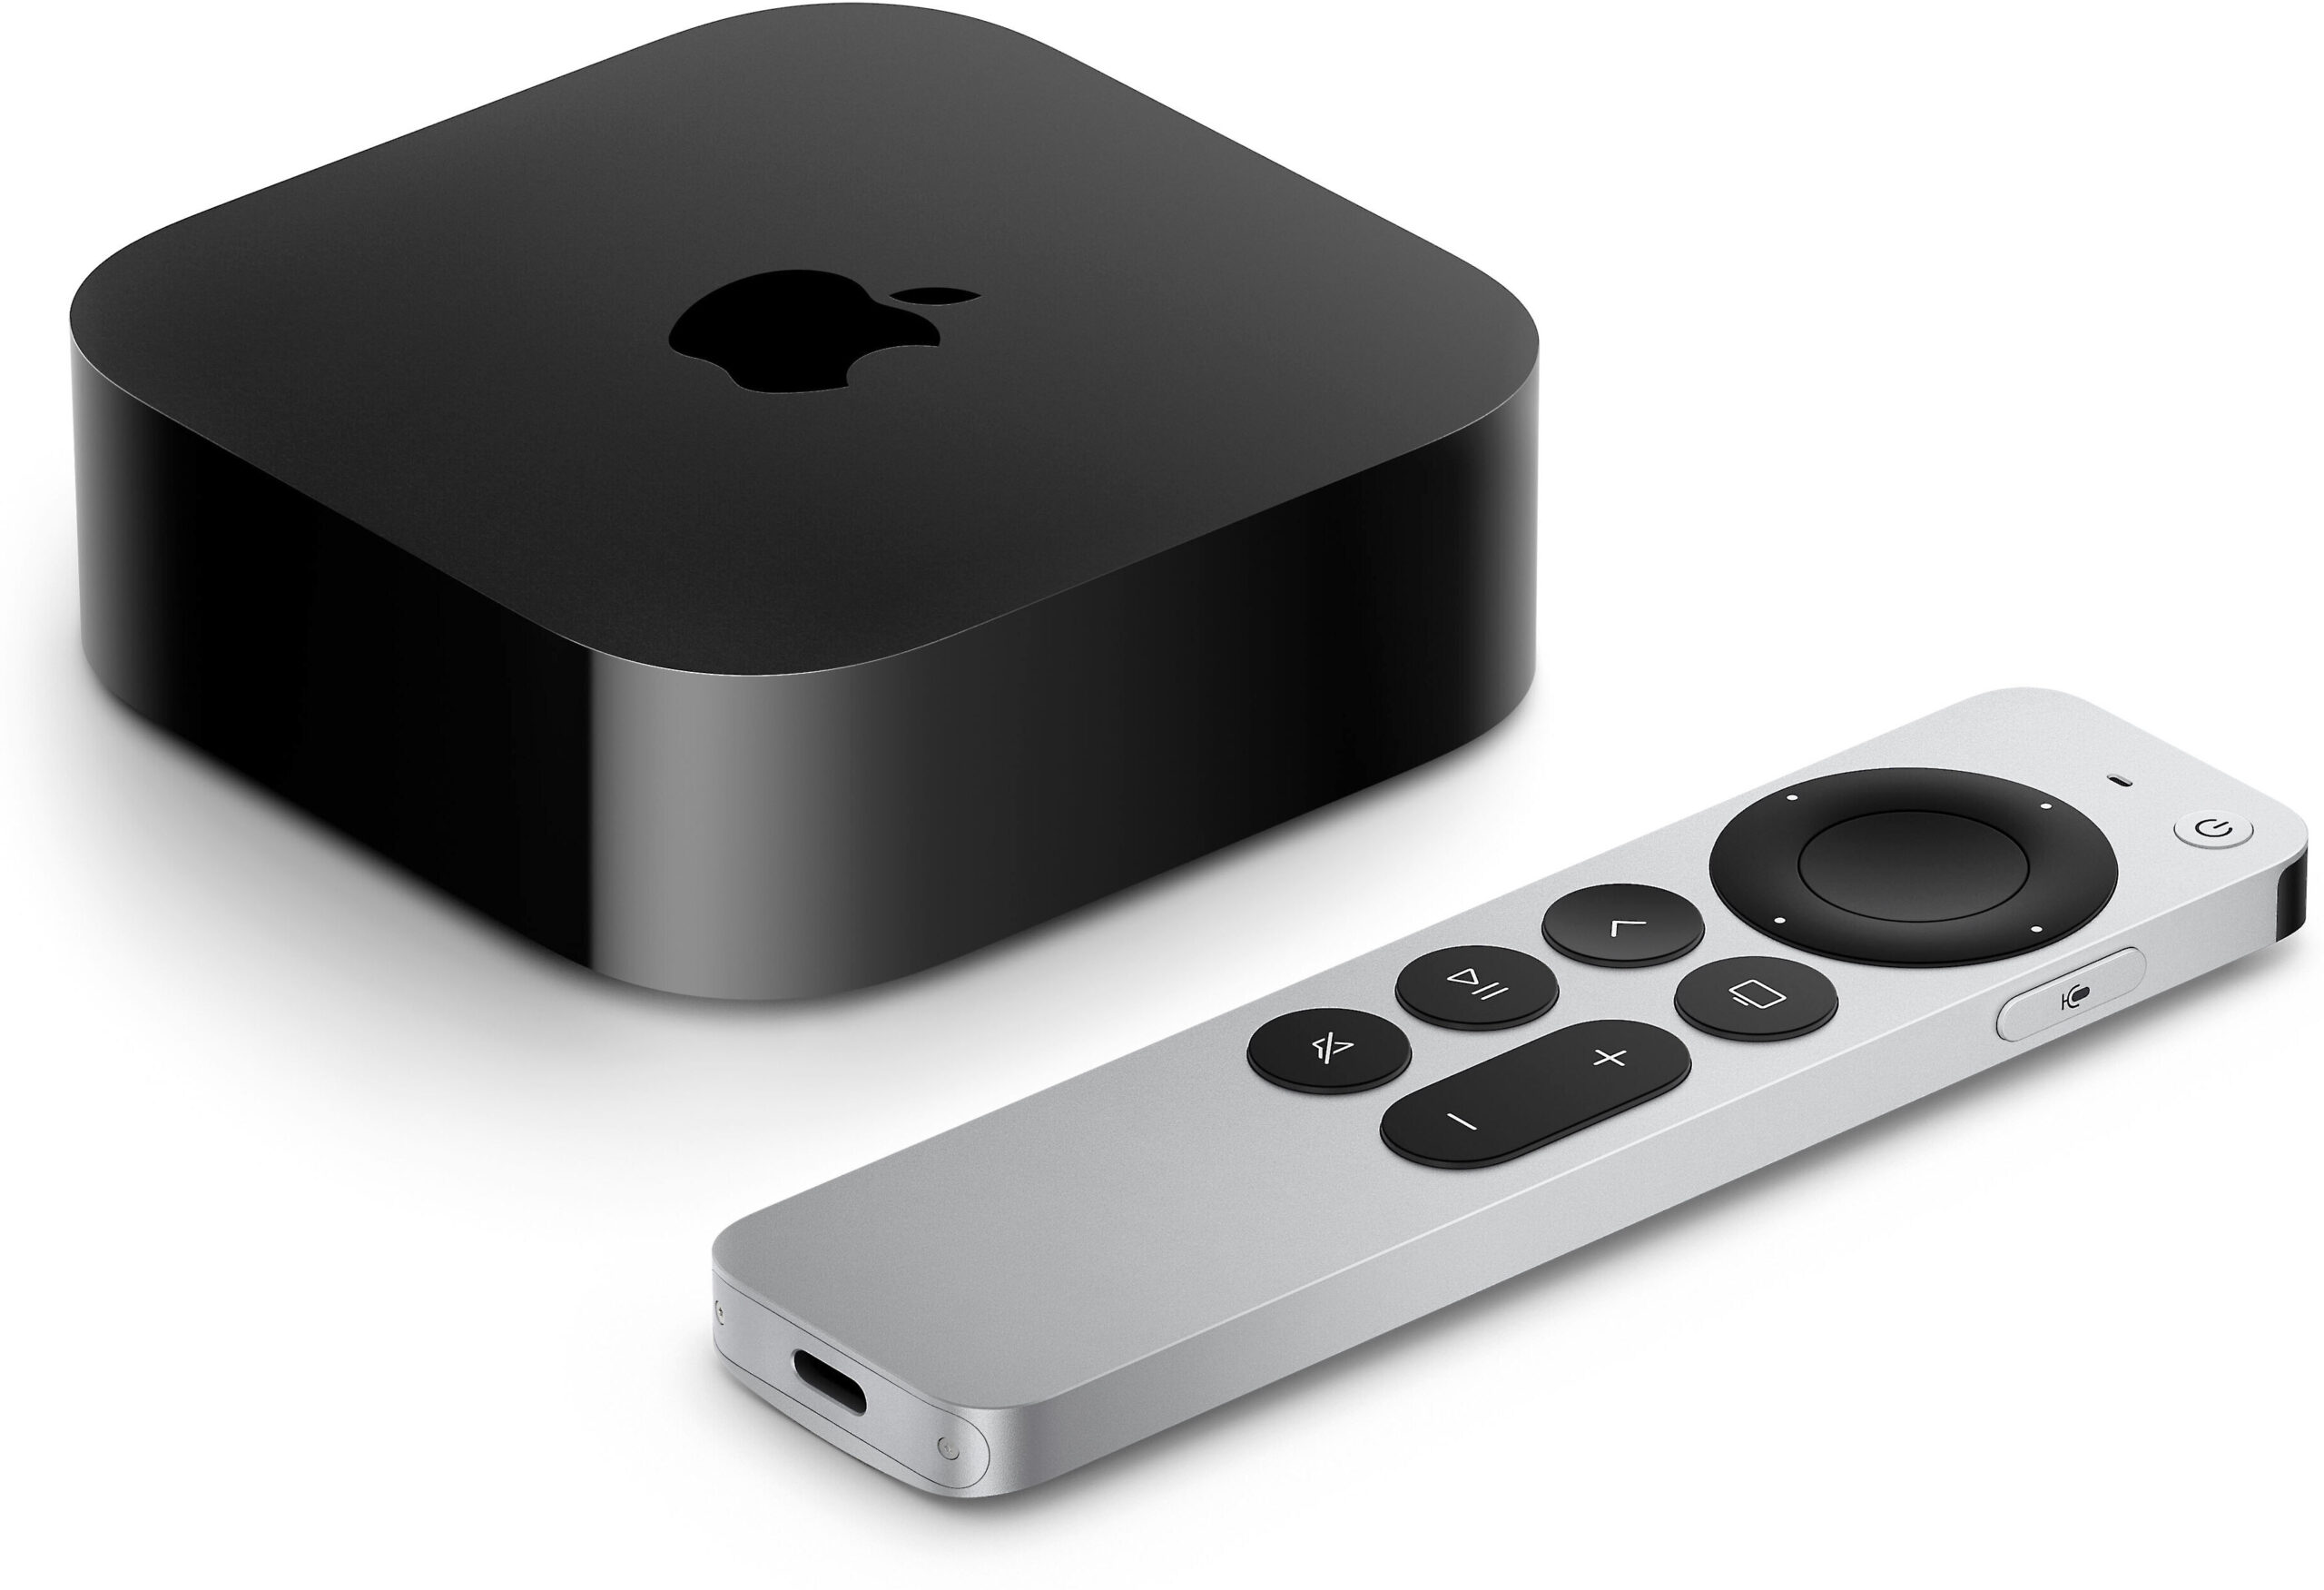 Apple Media Streamer for seamlessly streaming content to your Smart TV